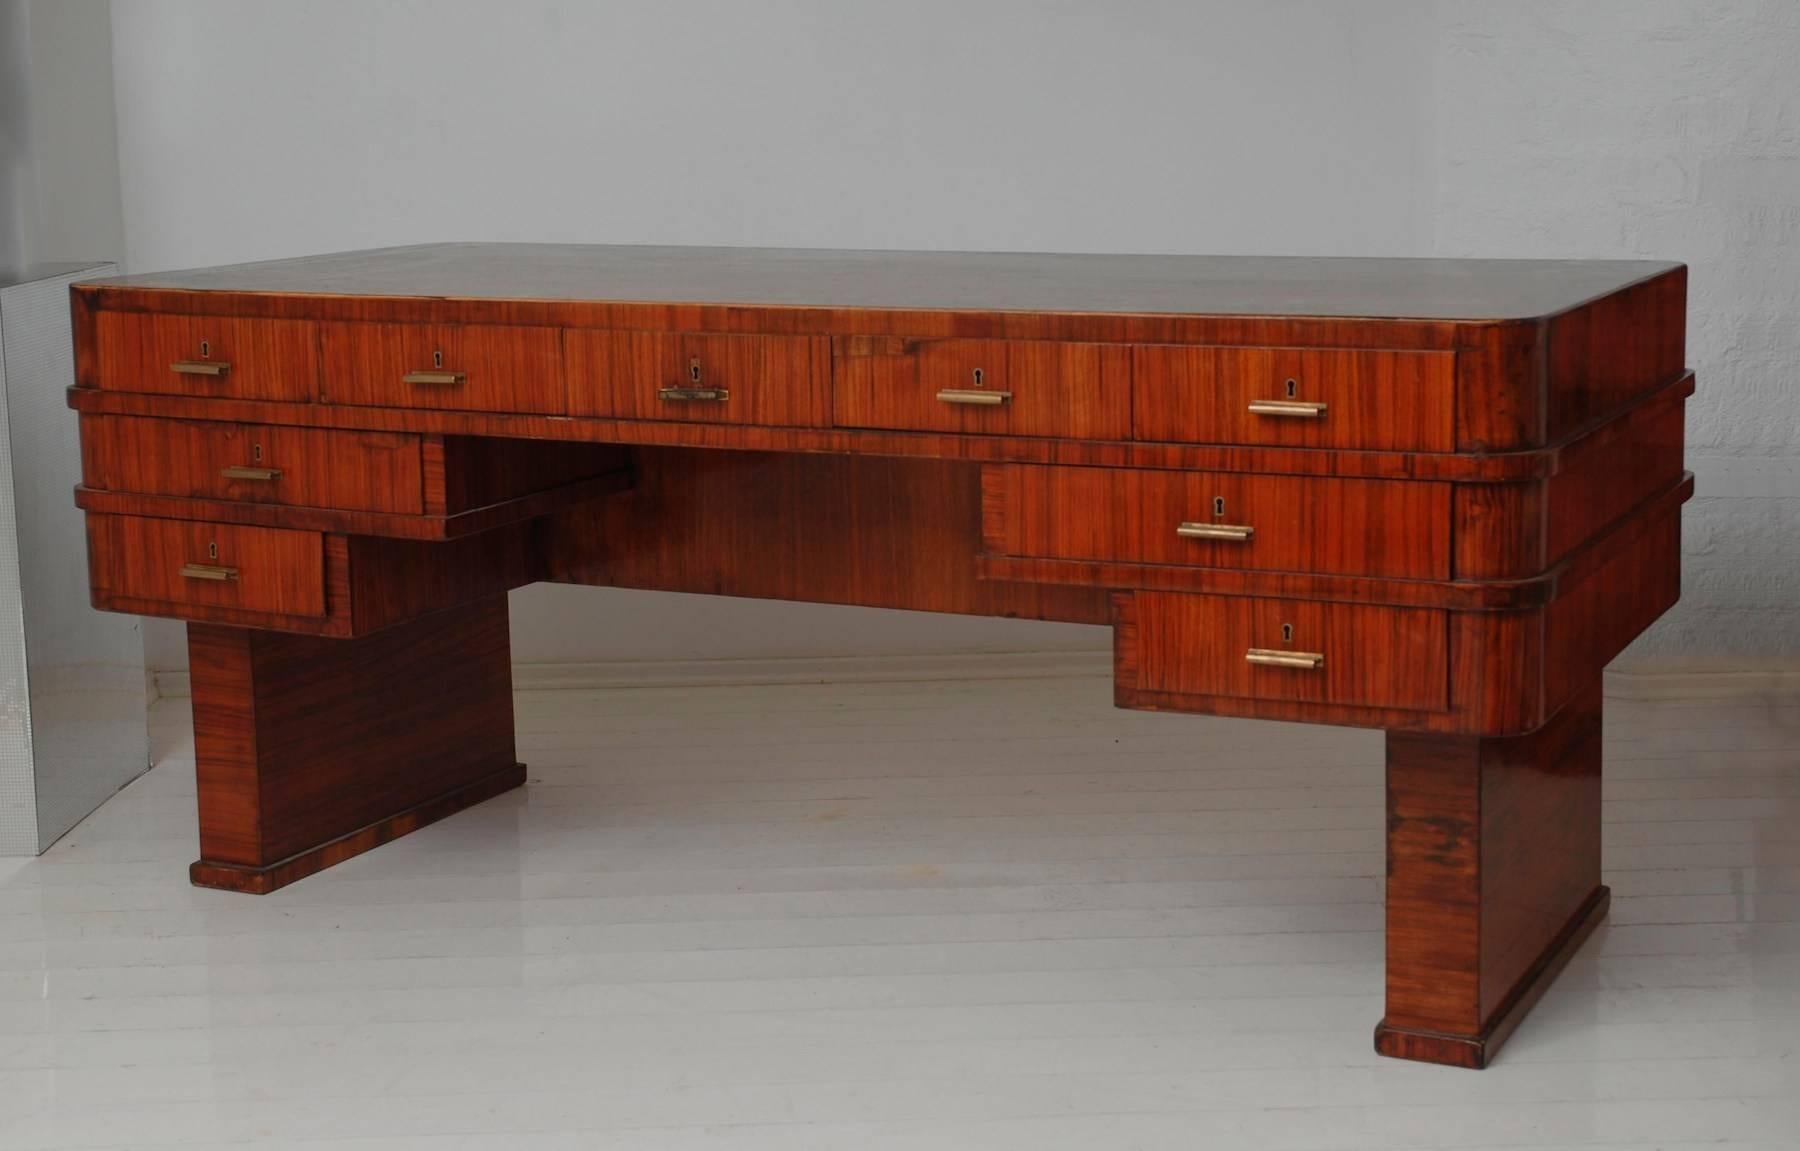 This rare large double-sided desk was designed by Lajos (Ludwig) Kozma, who had an unprecedented influence on the European design through his drawings, buildings and furniture.

This desk has walnut and rosewood veneer and brass knobs. It has 18